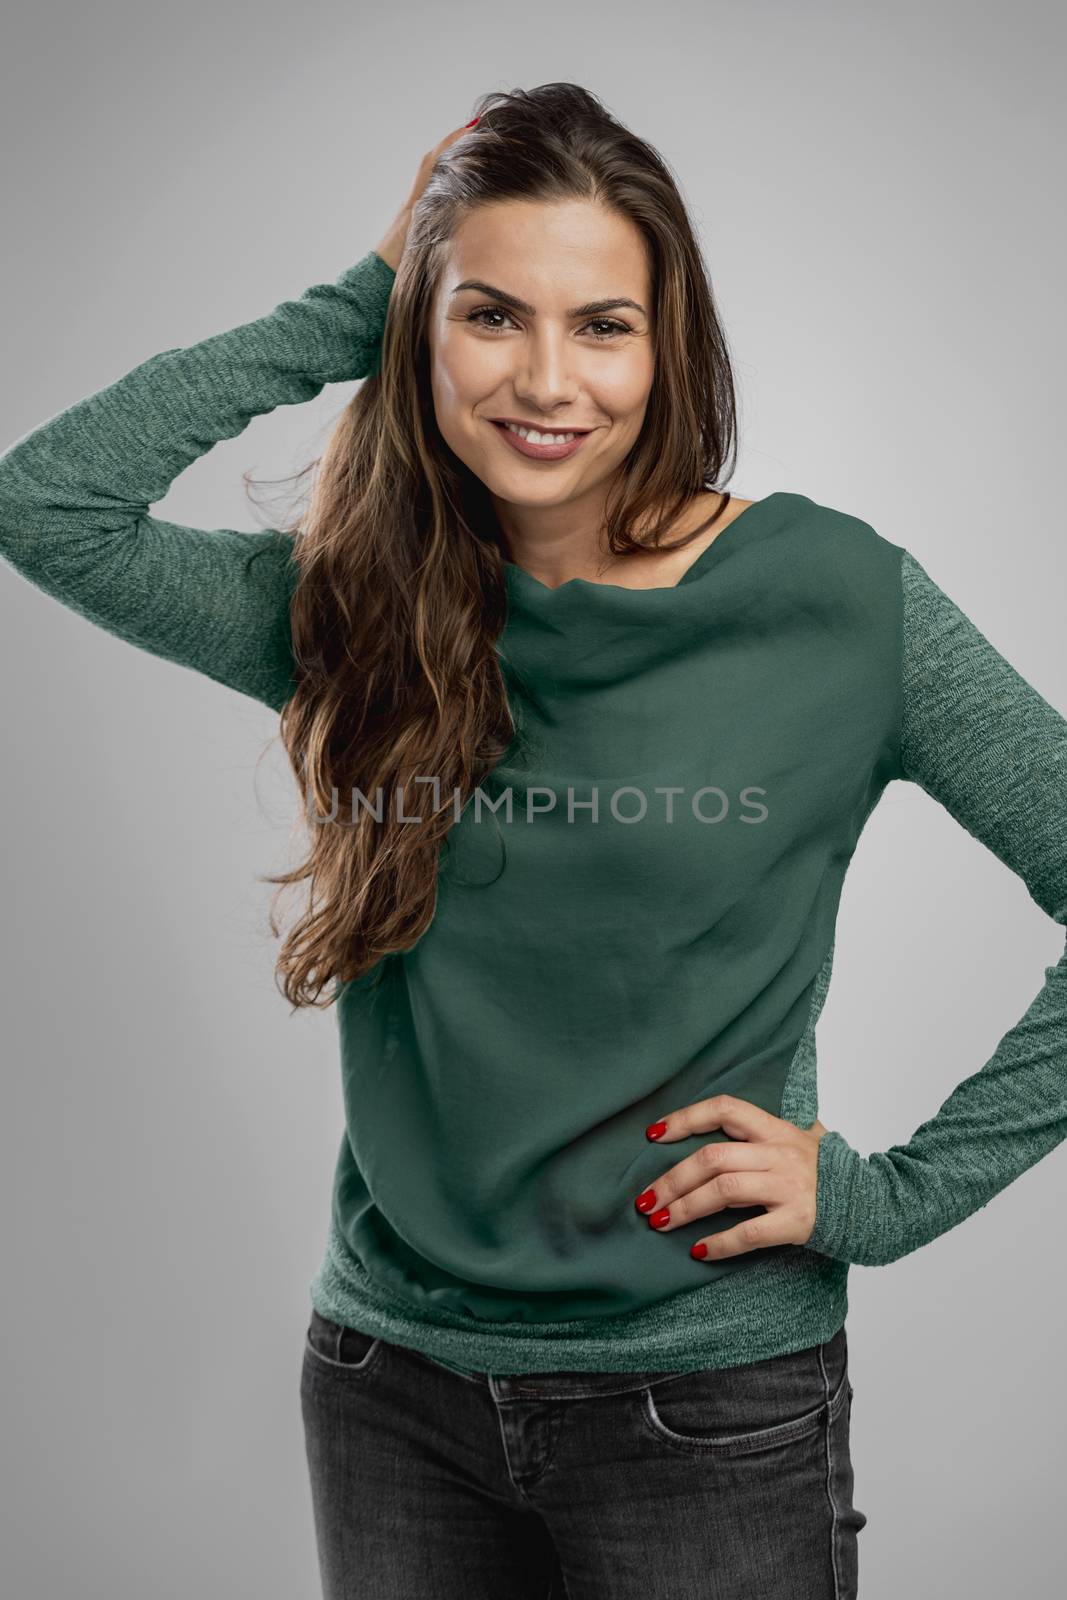 Beautiful woman standing over a gray background with her hand on the hair and smiling